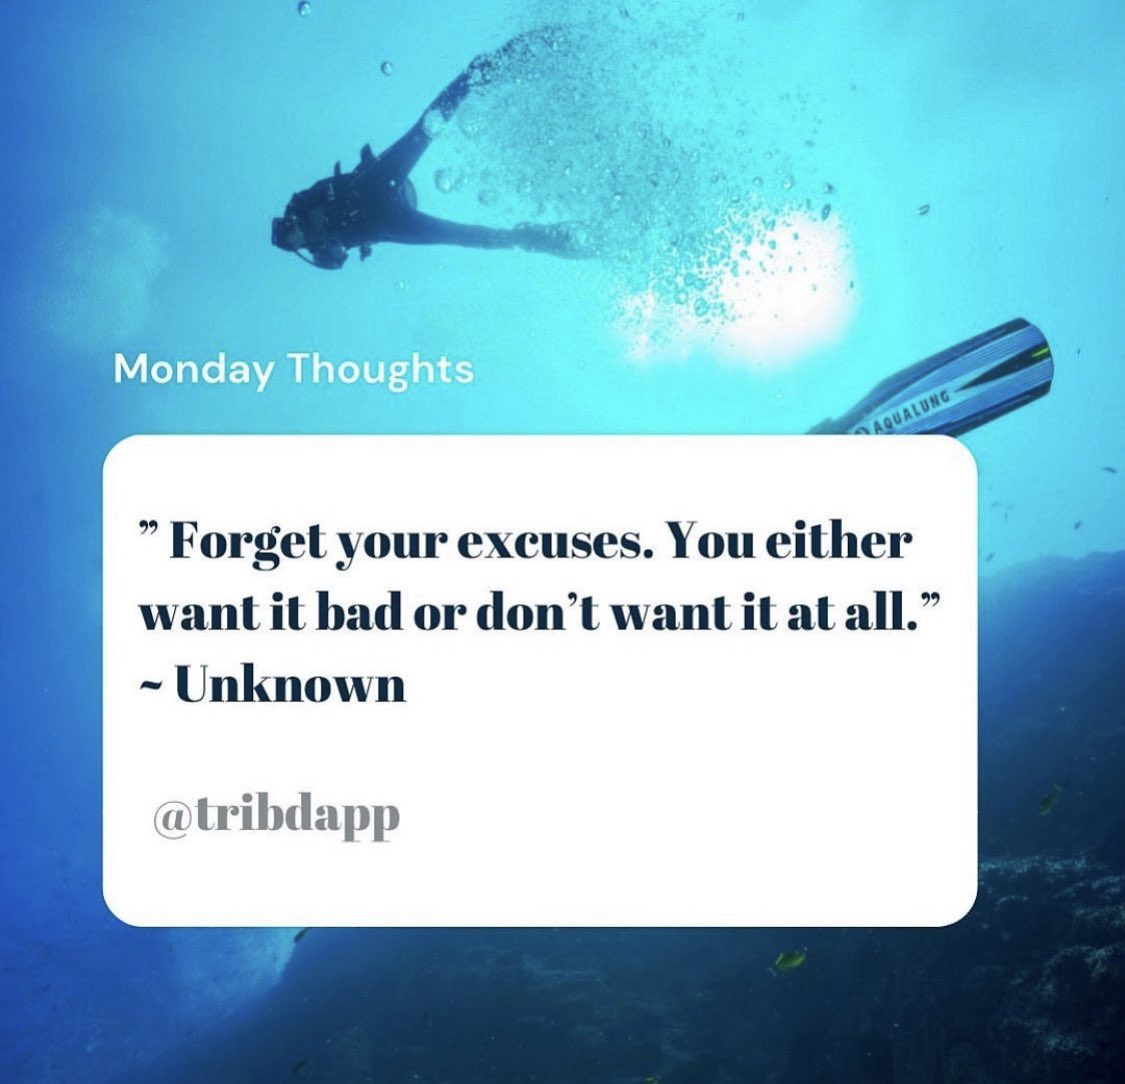 Forget your excuses. You either want it bad or don’t want it at all.

#mondaymotivation #monday #mondaymood #tribd #tribdapp #findyourtribe #travel #travelapp